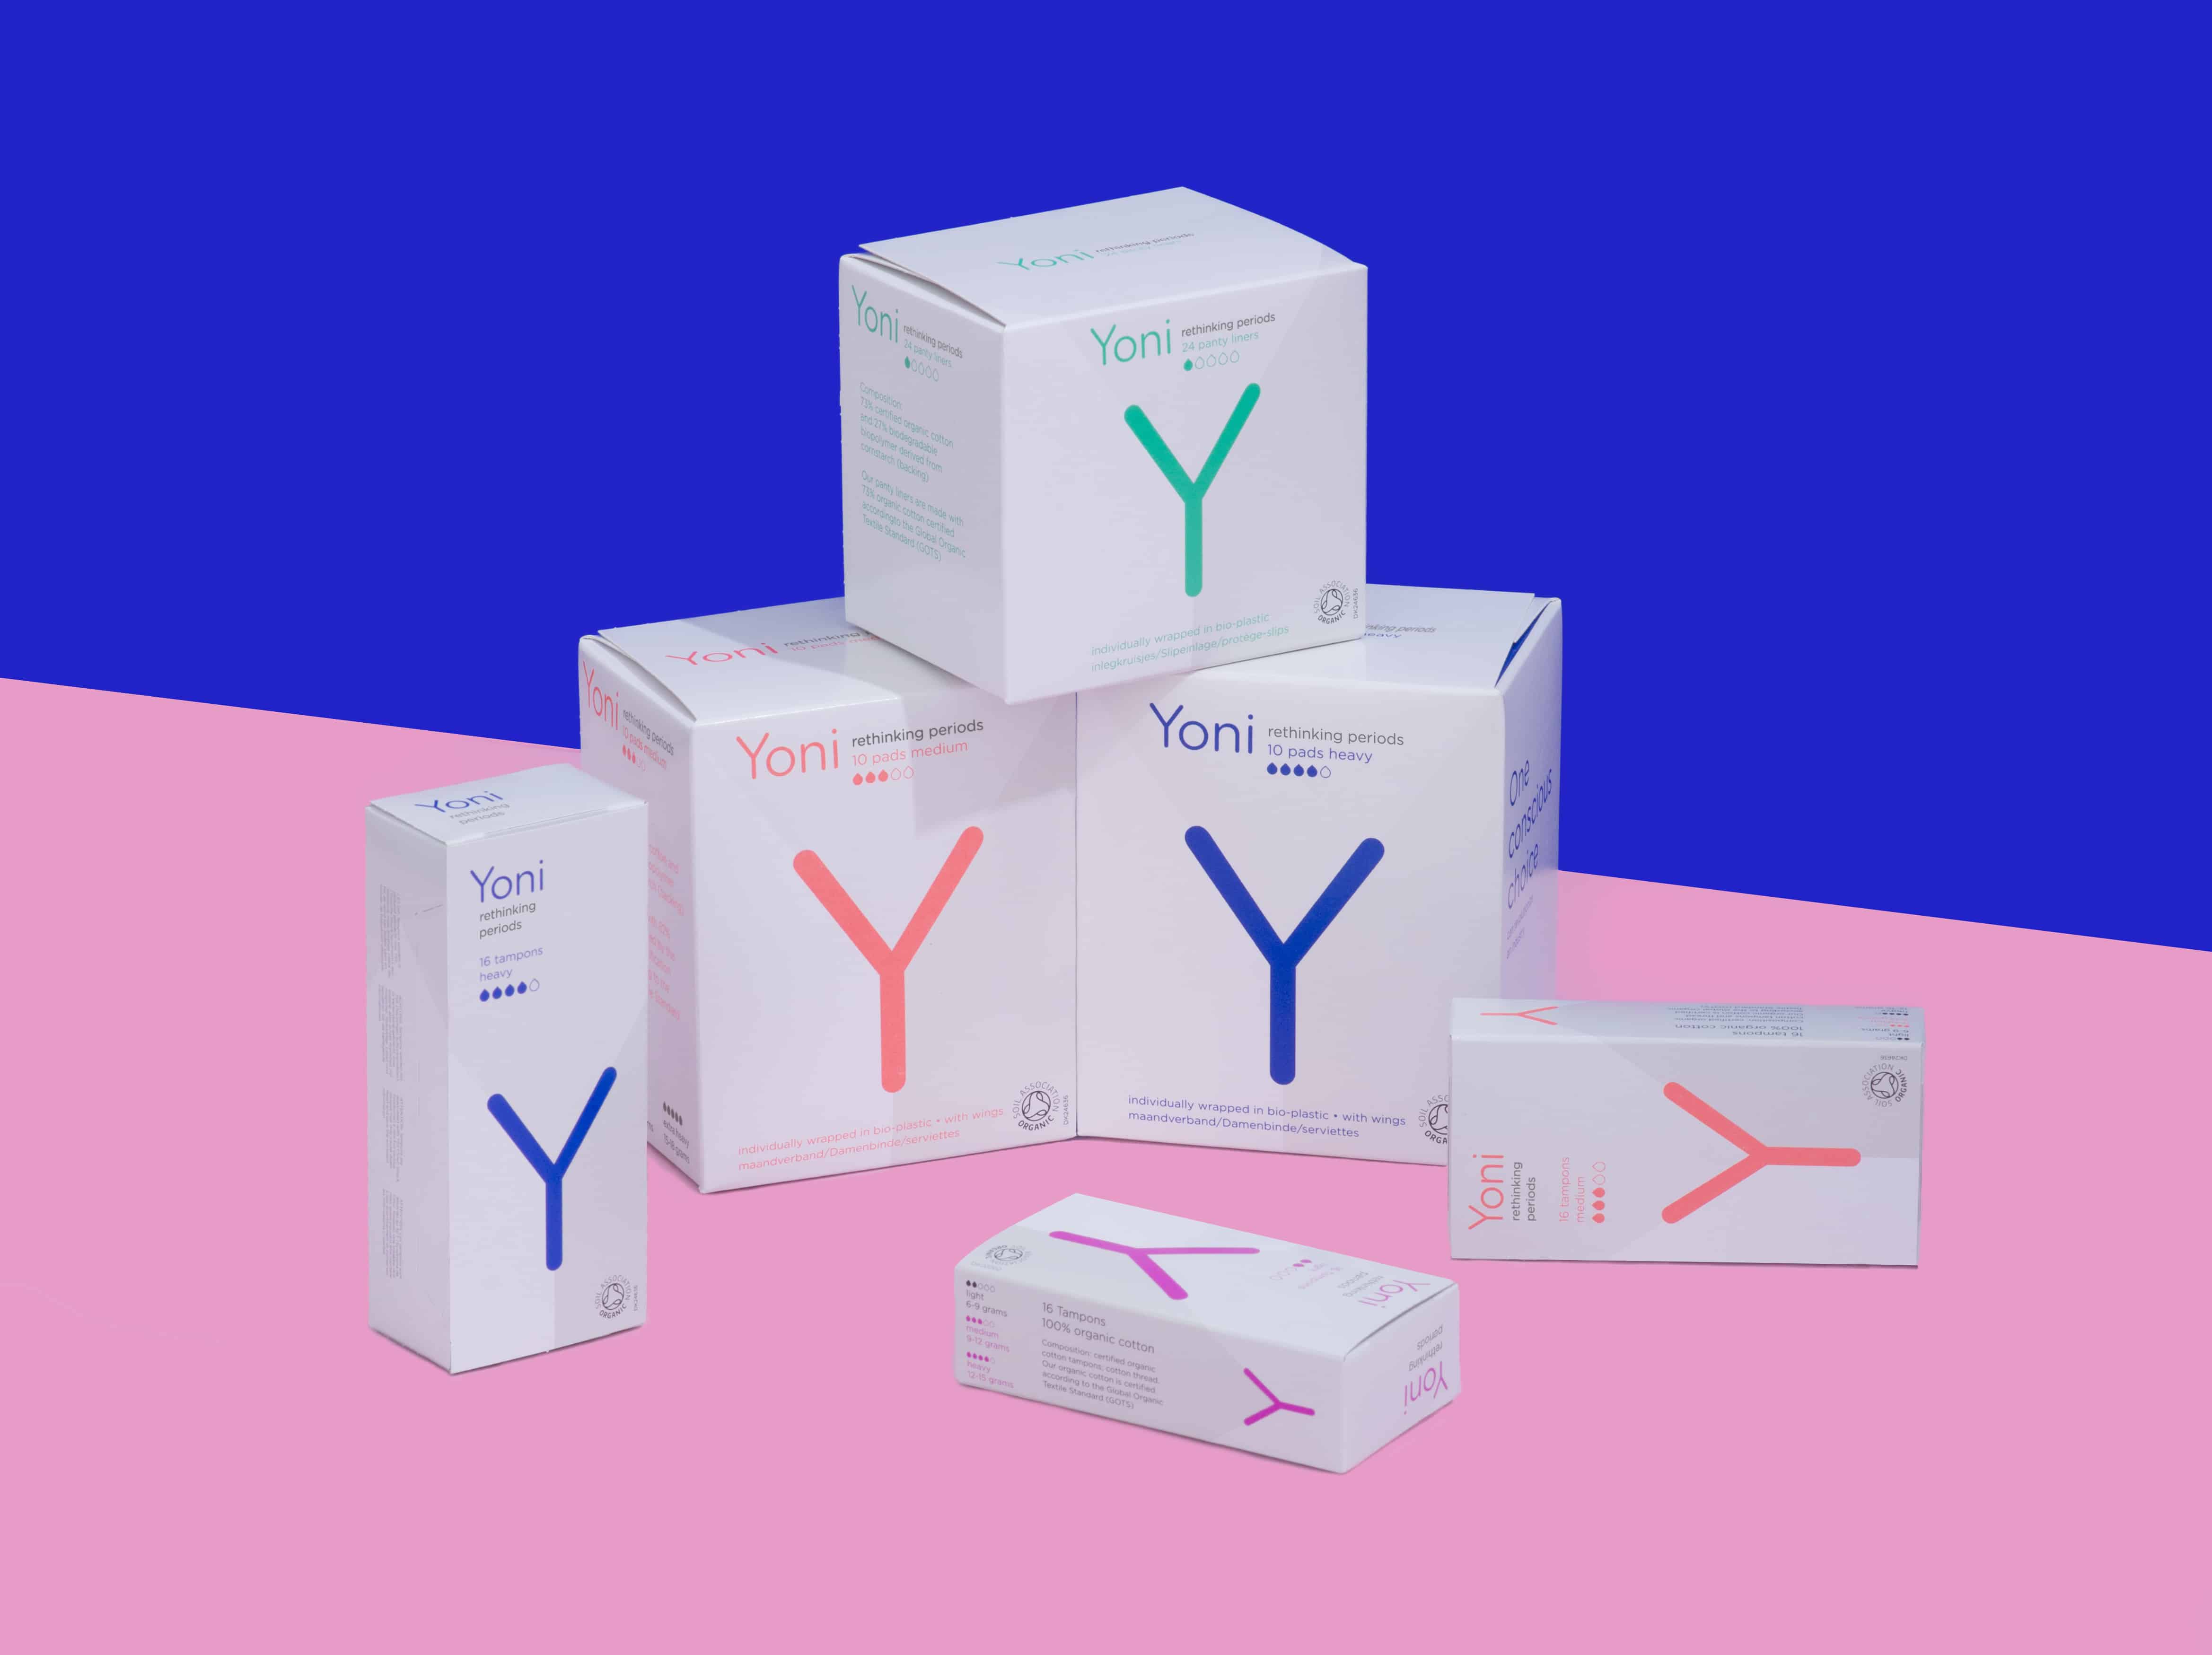 Yoni products